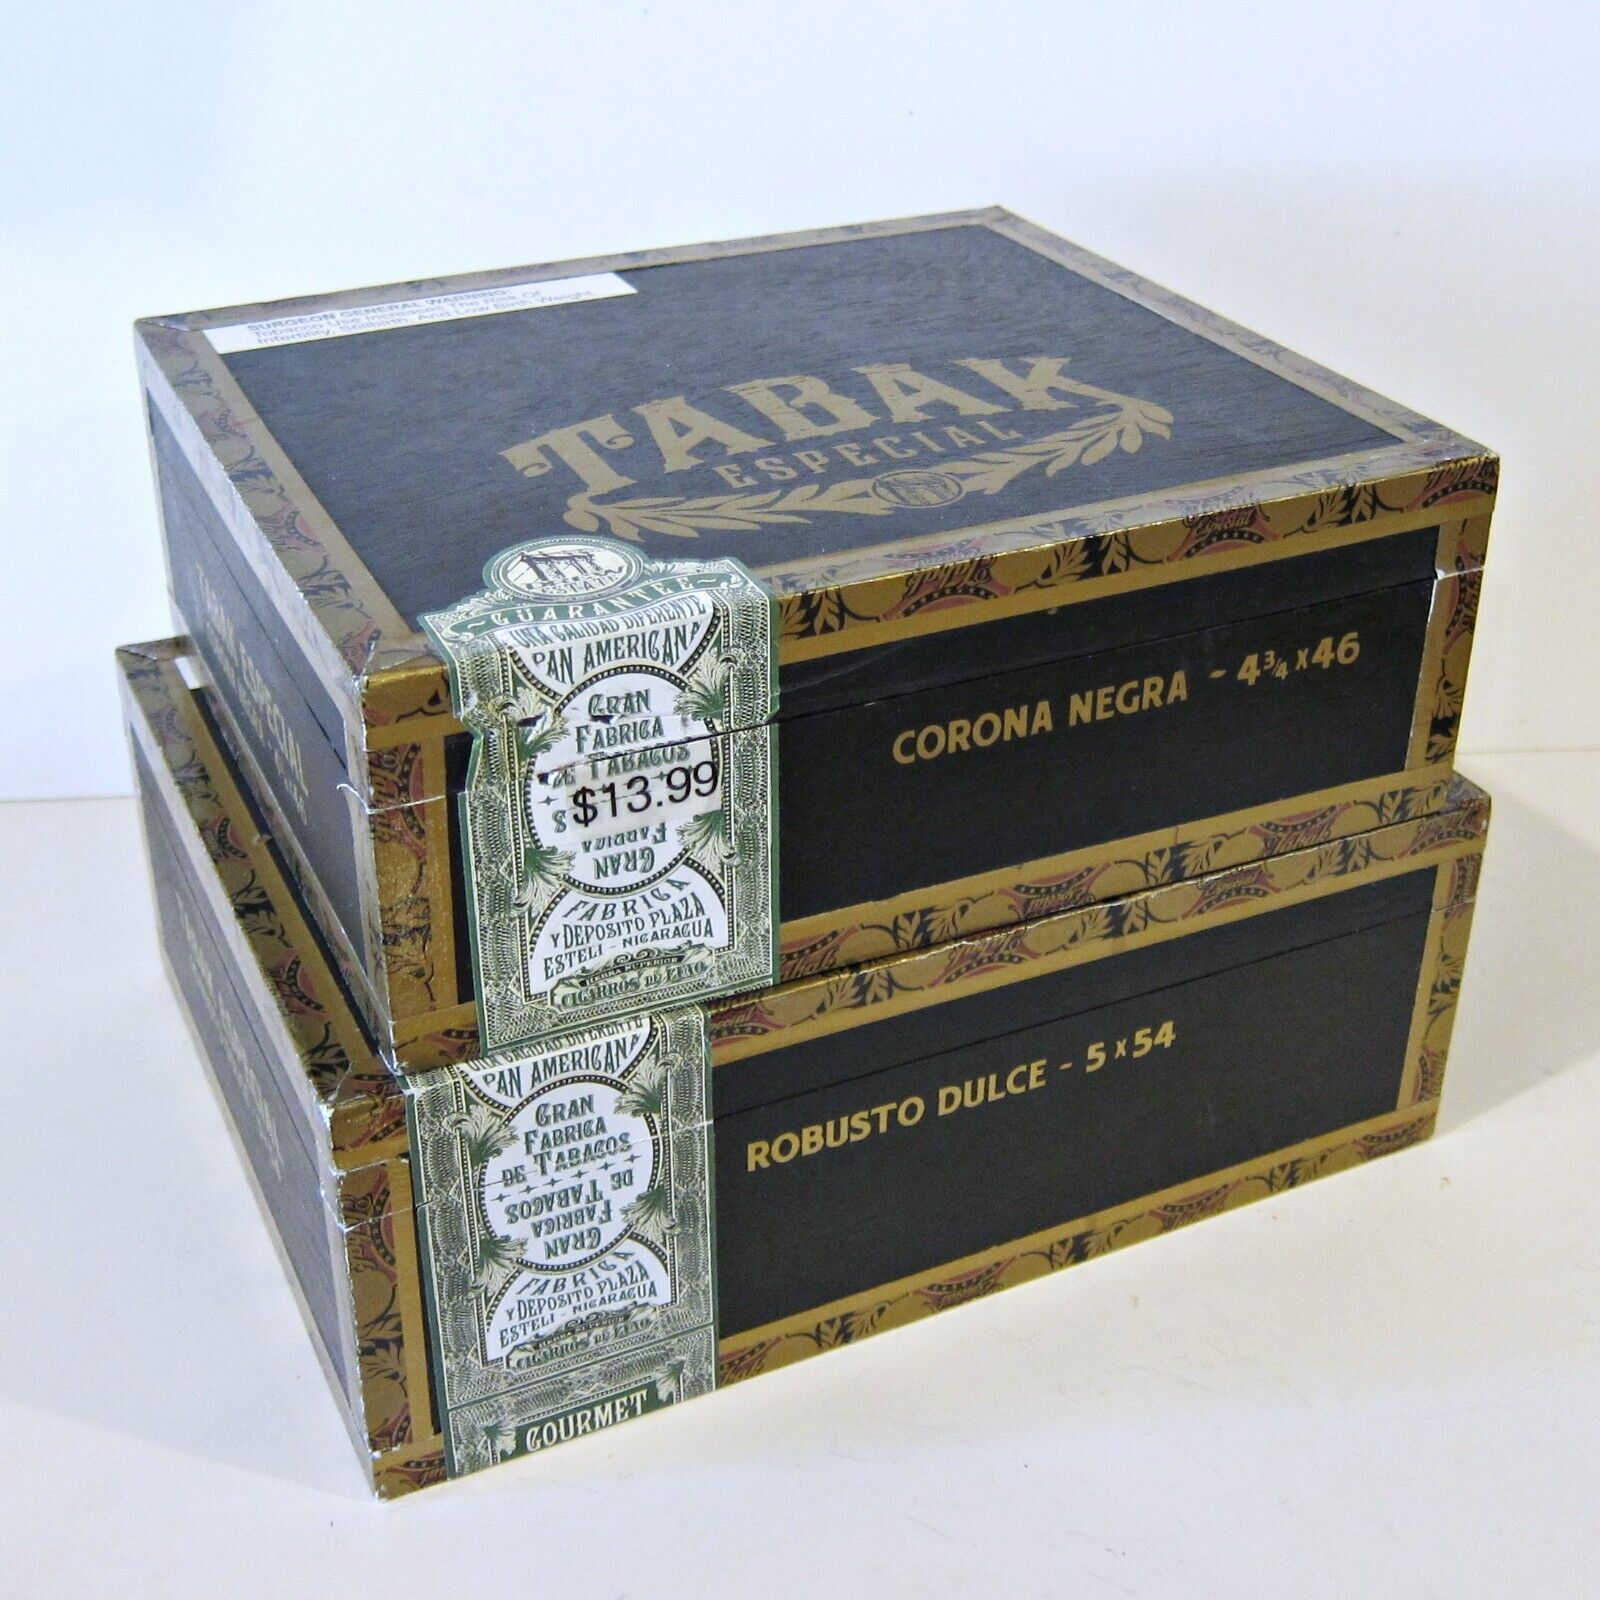 2 DIFFERENT TABAK ESPECIAL CIGAR BOXES - Empty Wooden